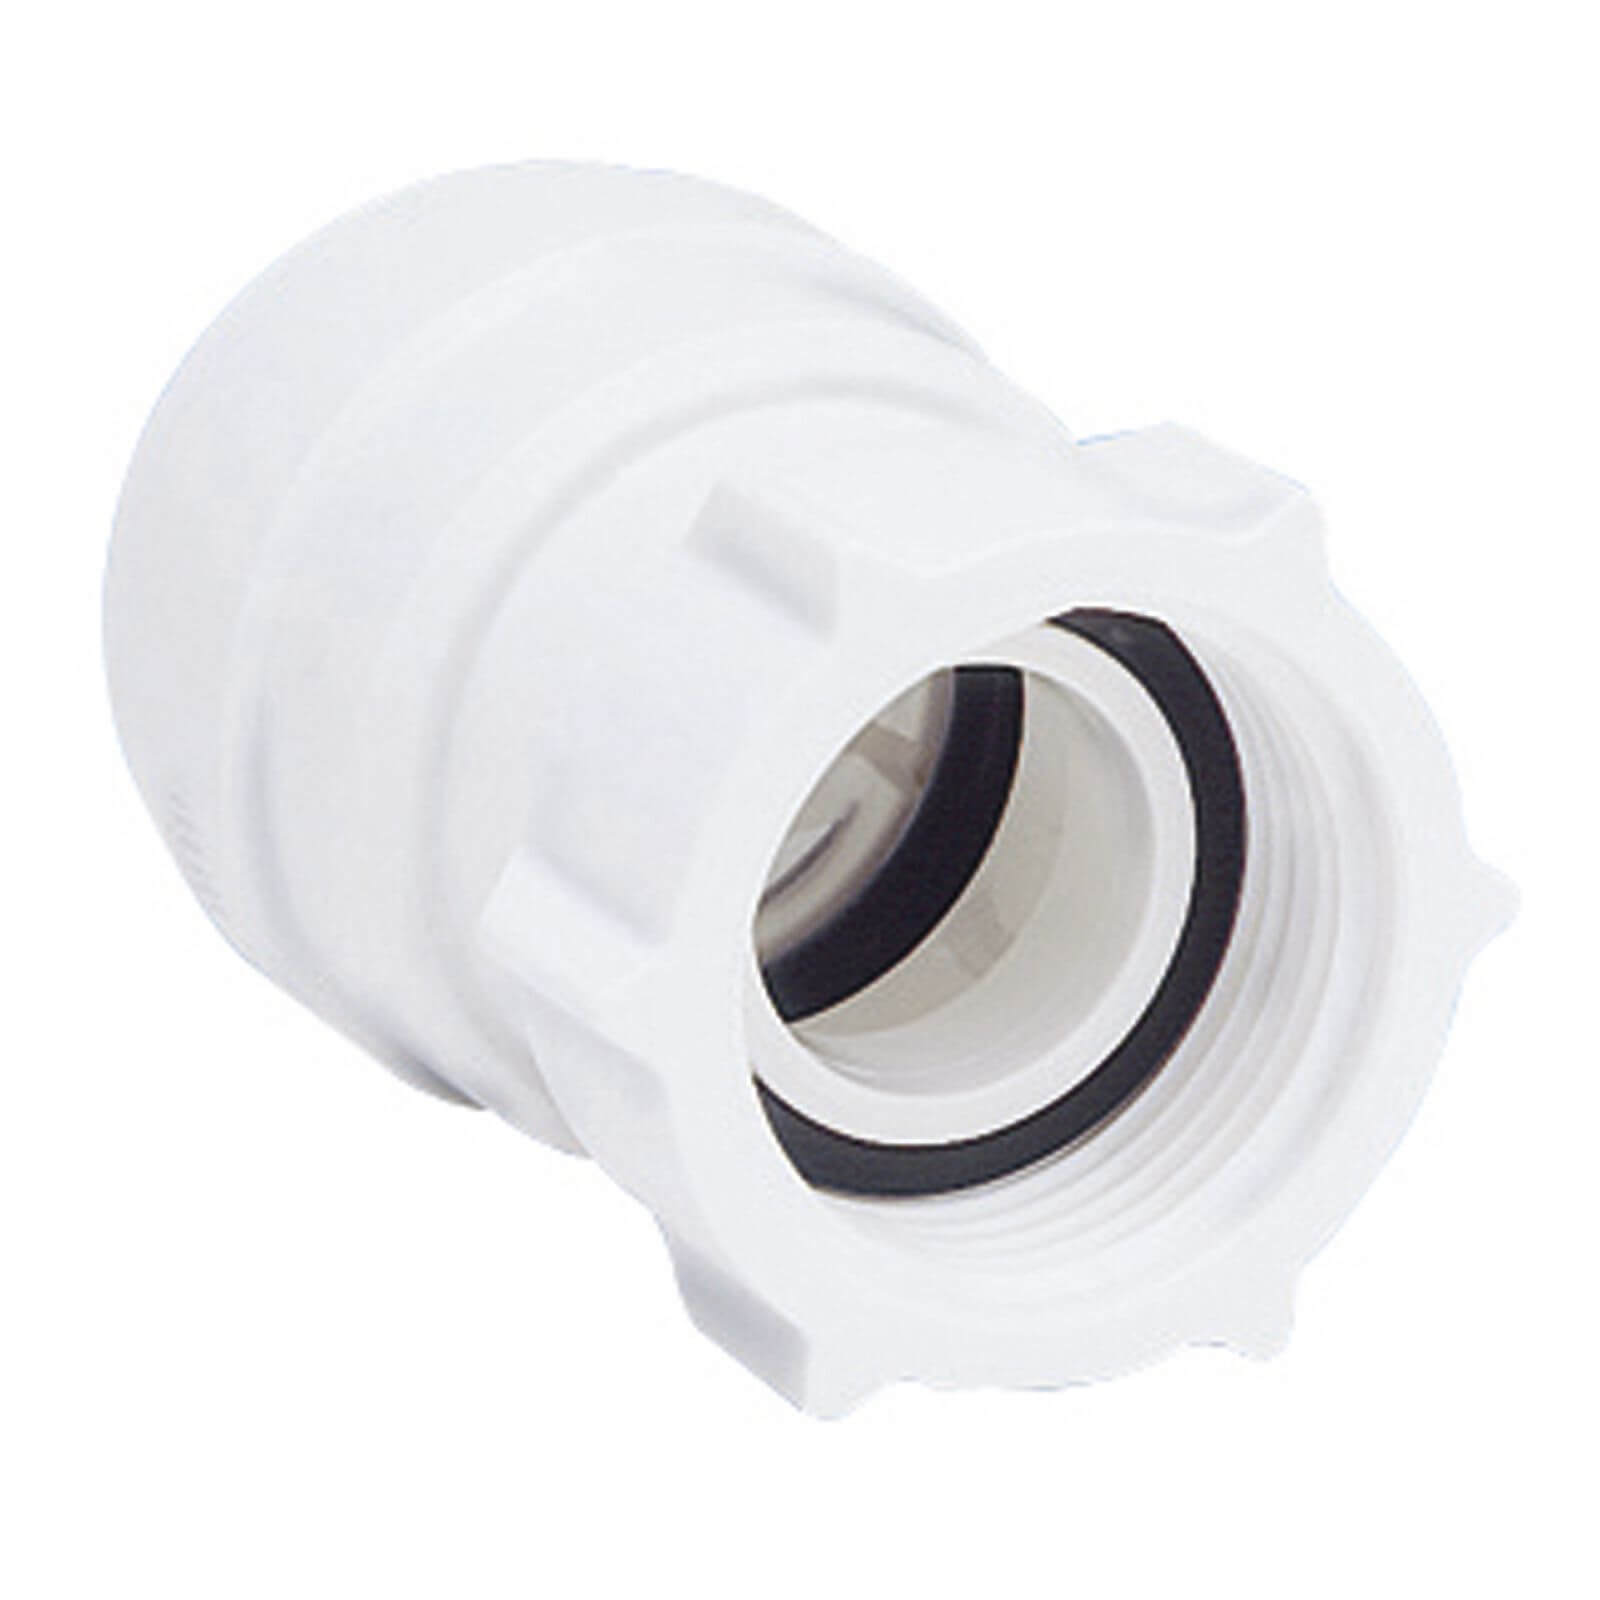 Photo of Jg Speedfit Female Tap Connector - 22mm X 3/4in